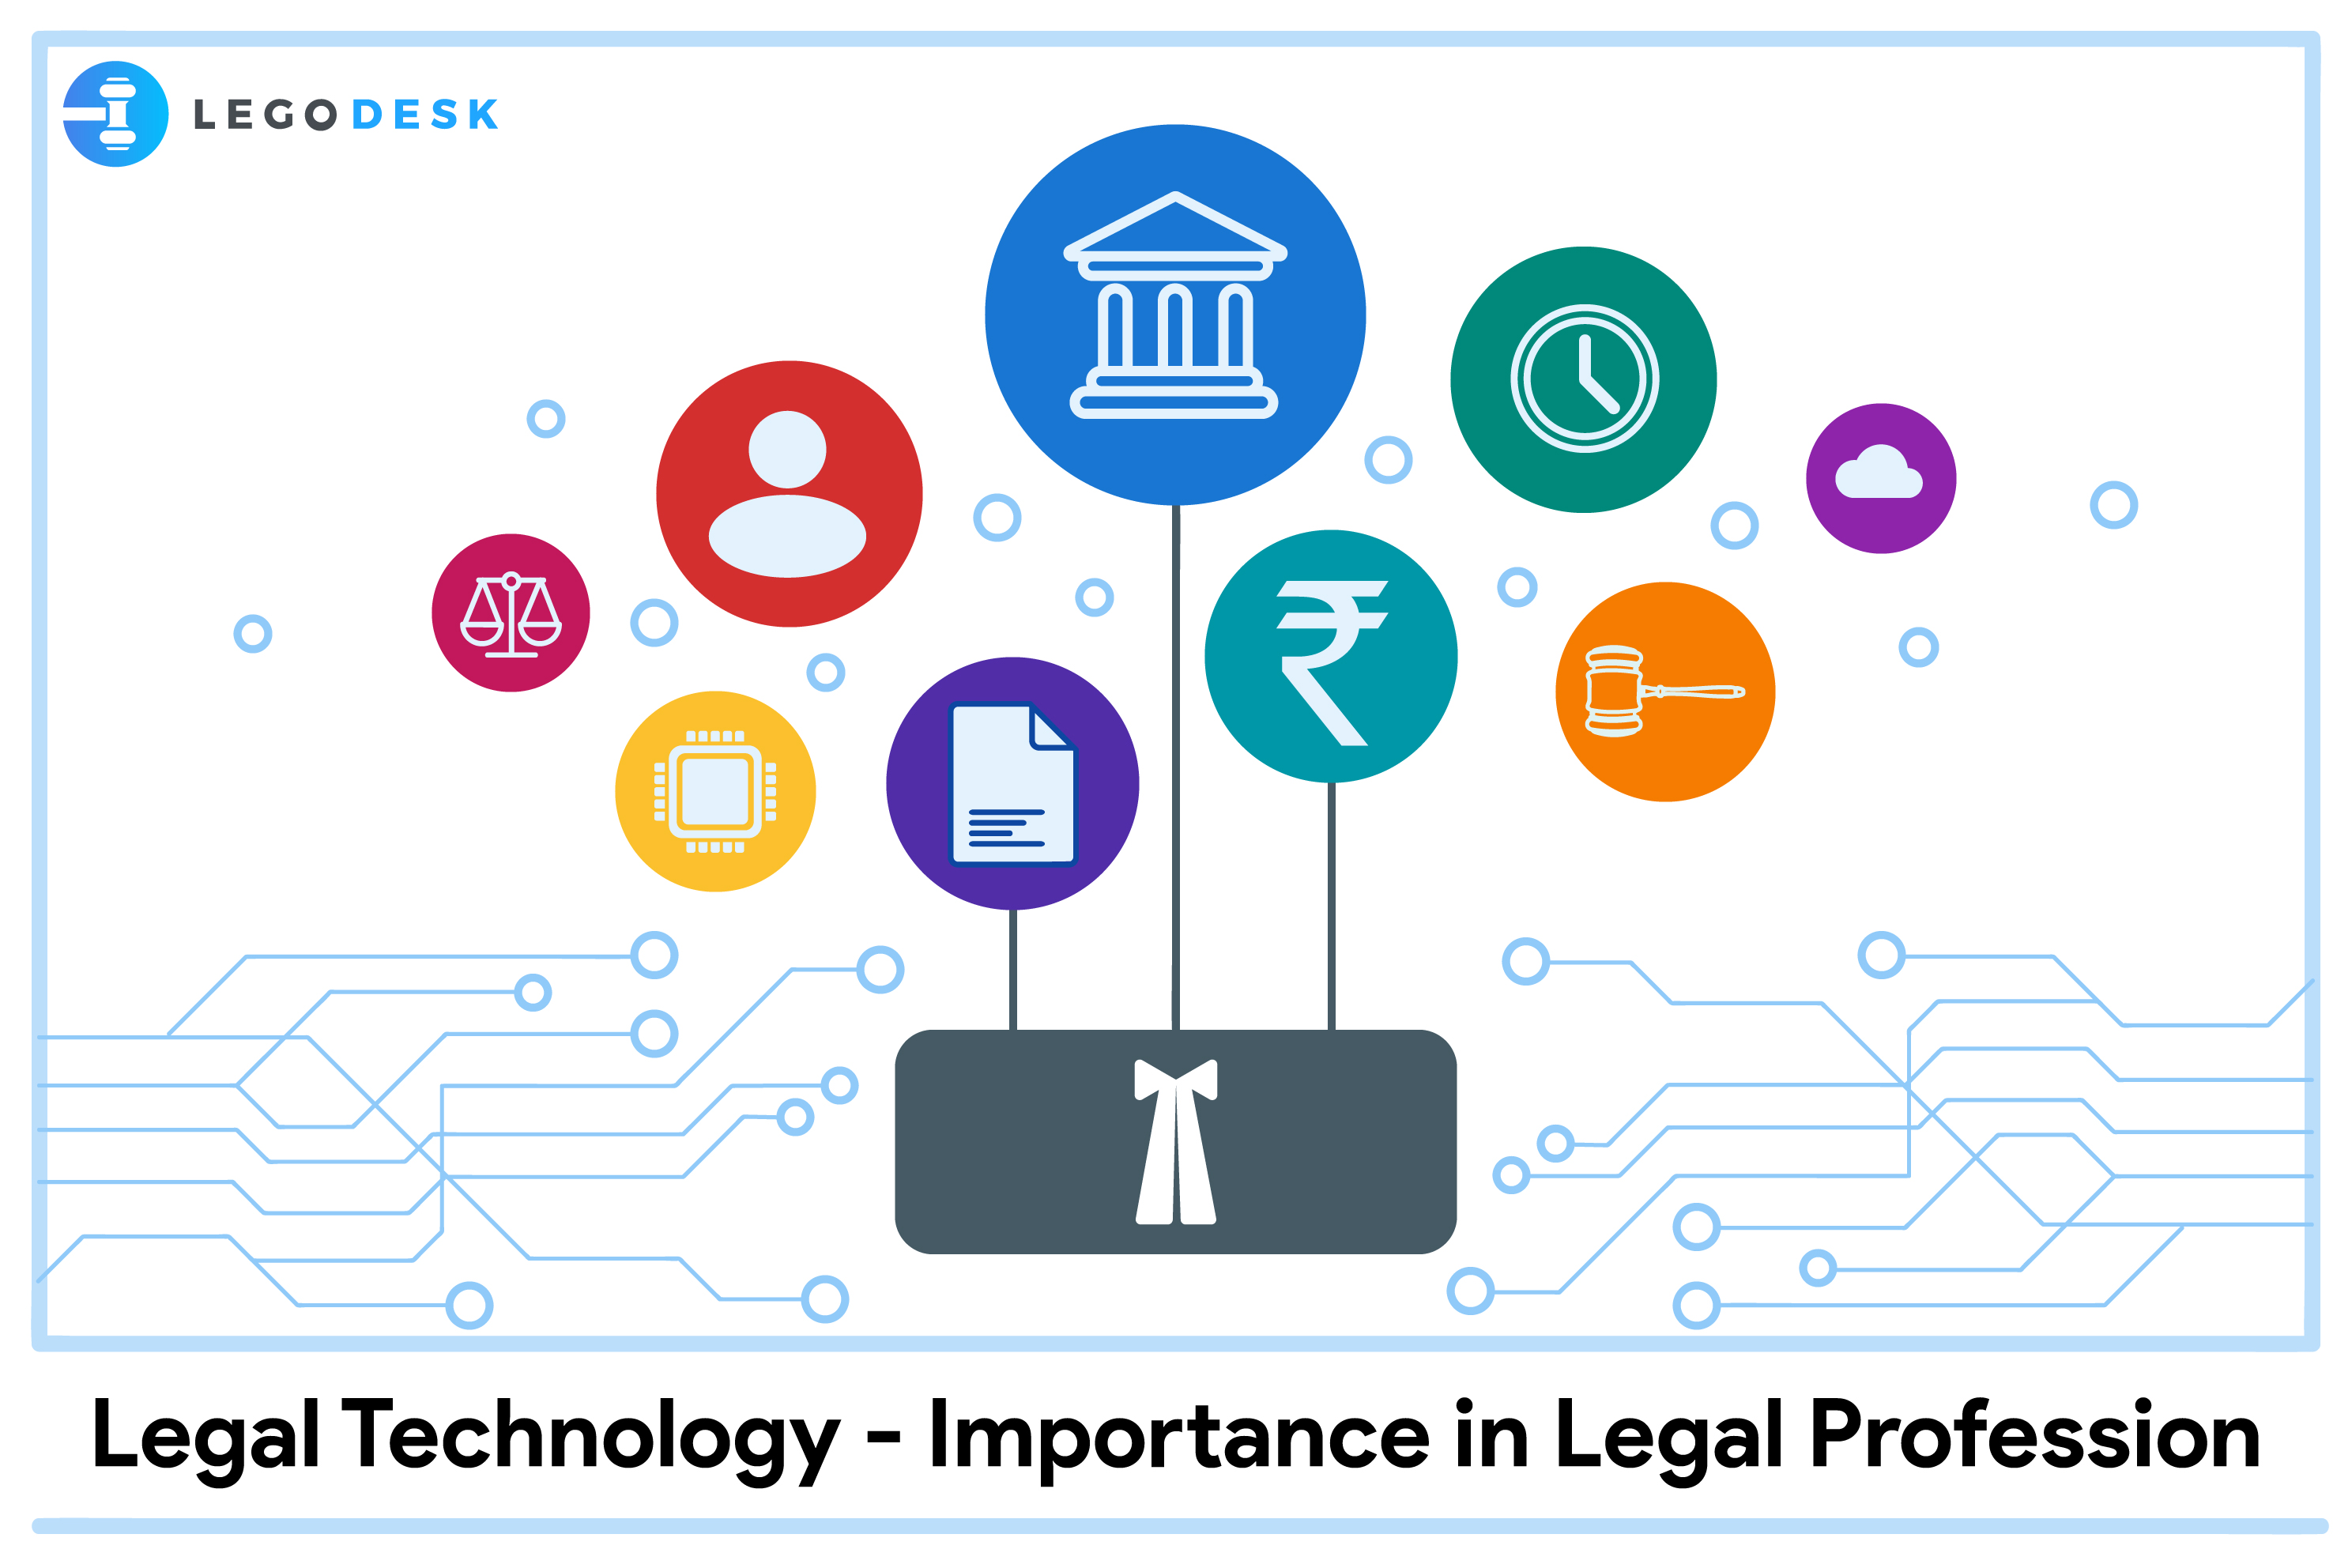 What is the Importance Of Legal Technology in Legal Profession?